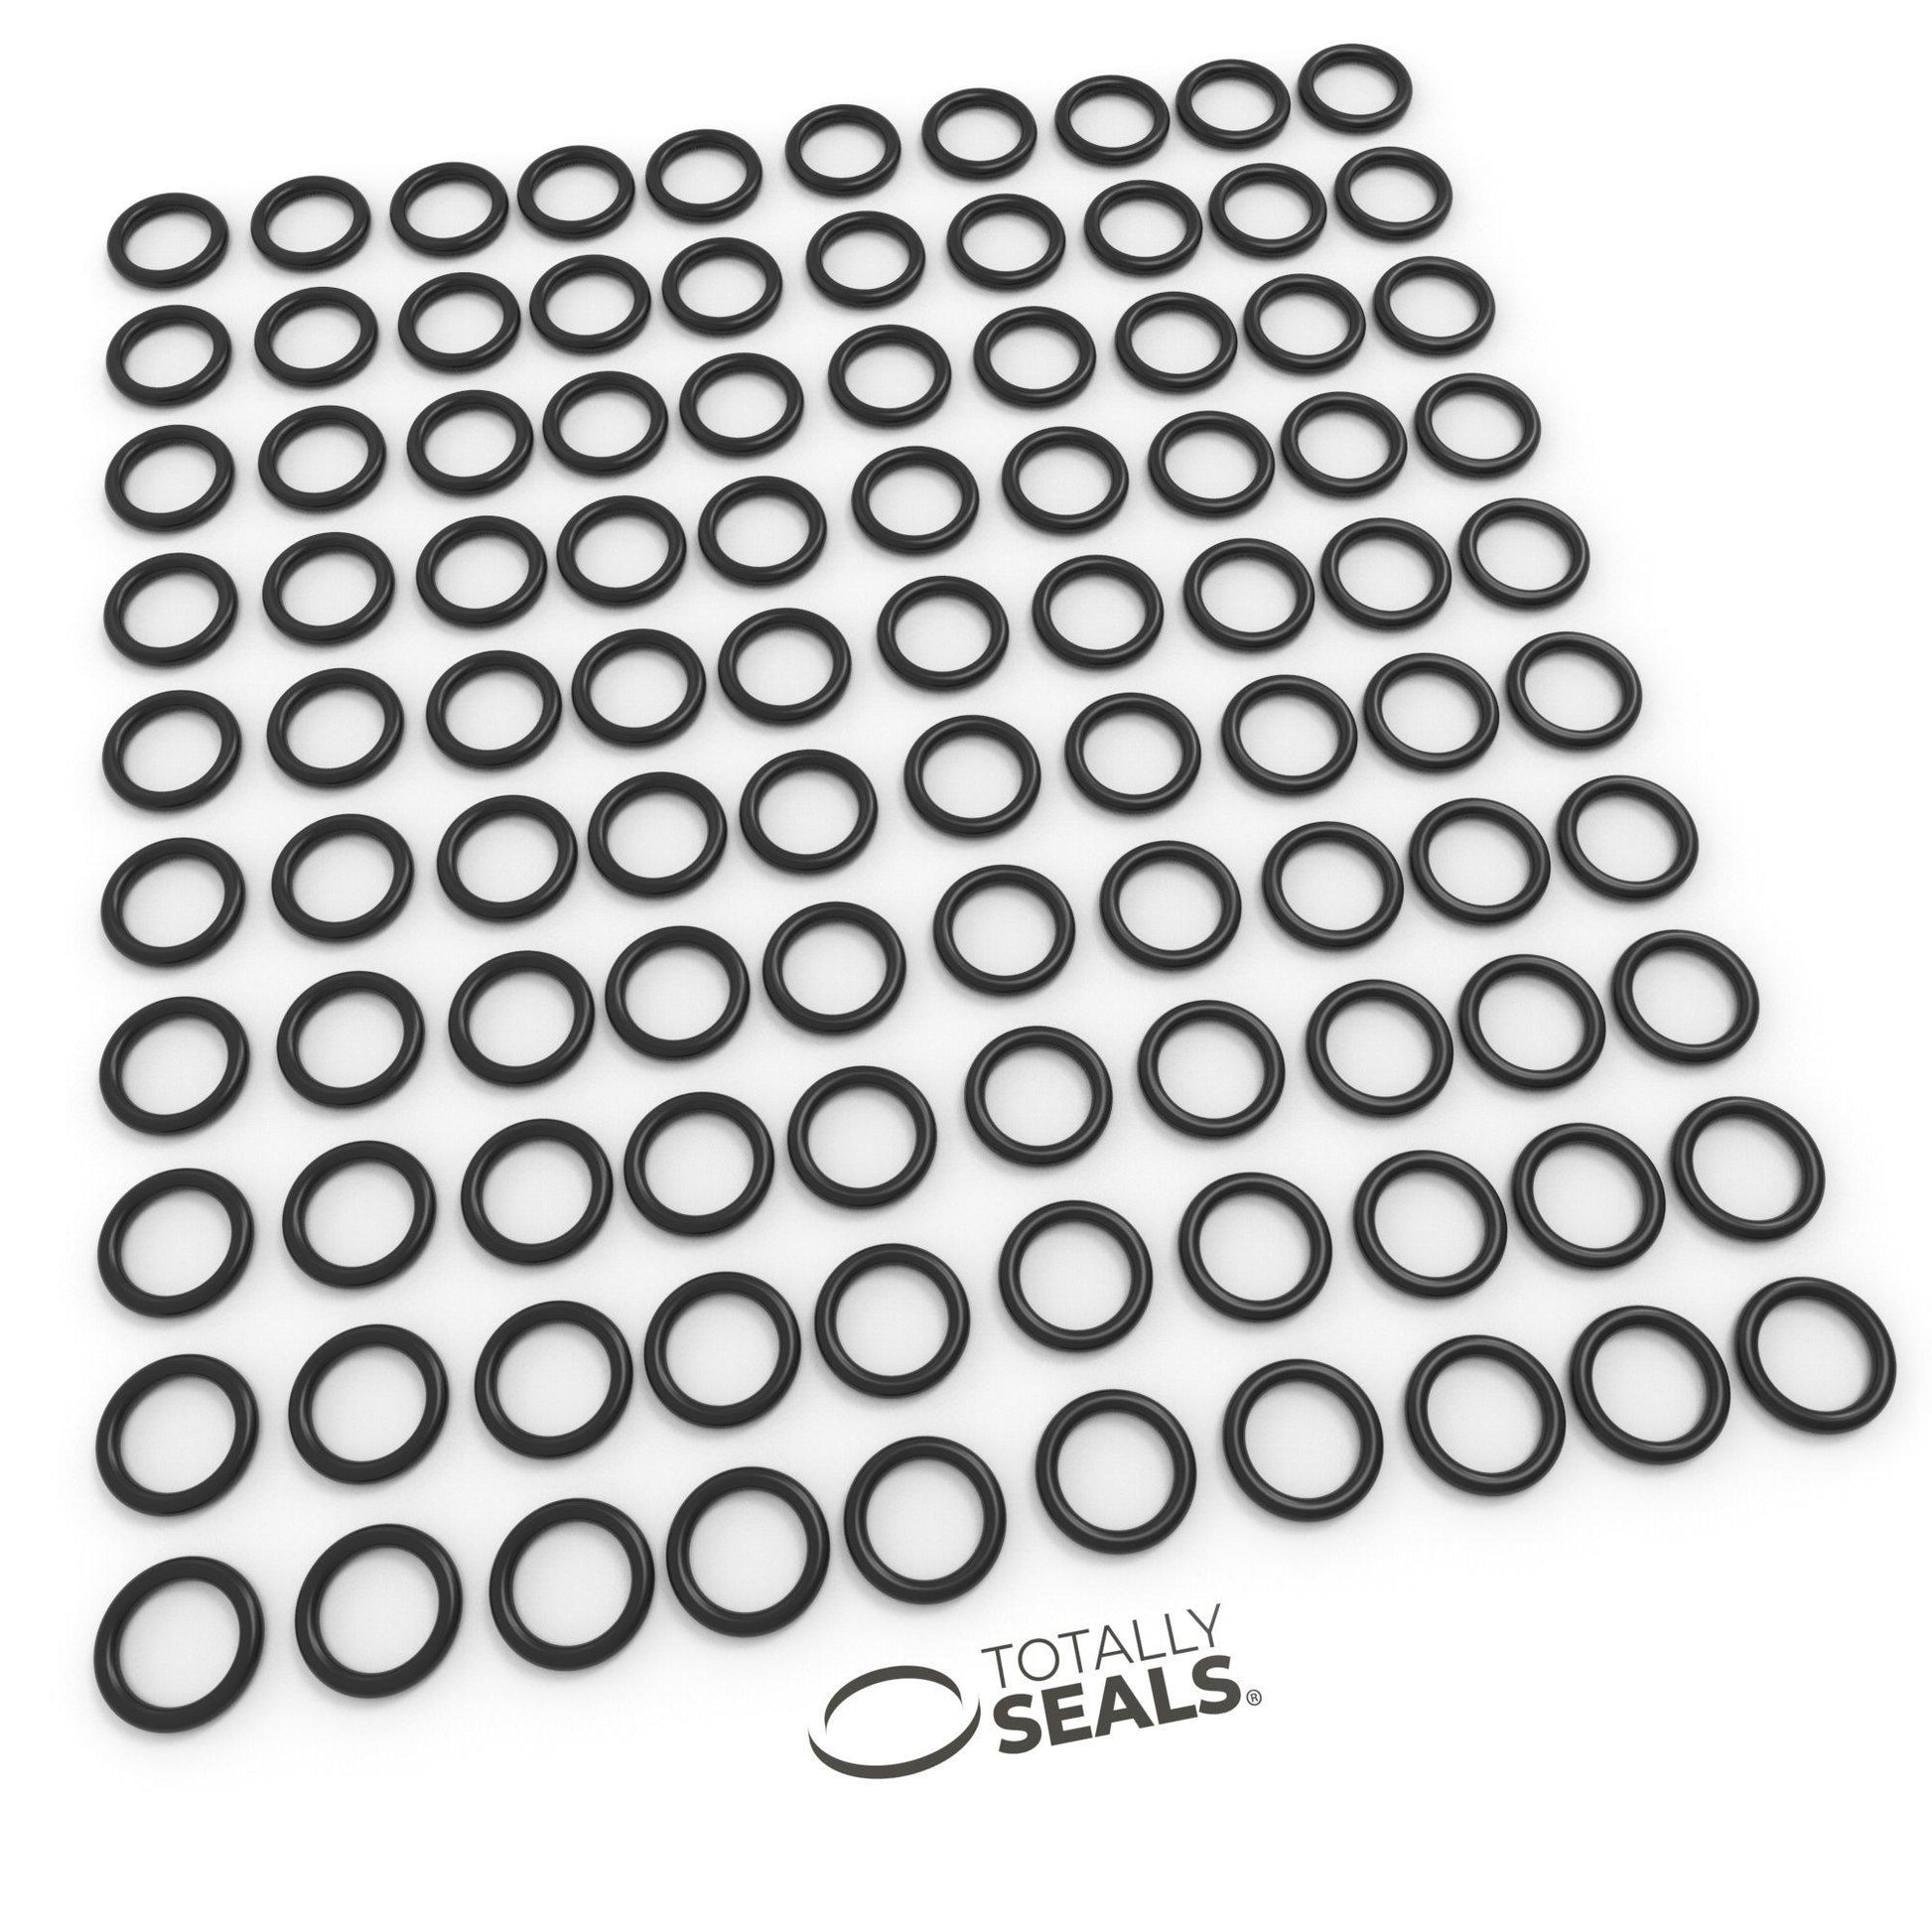 50mm x 2mm (54mm OD) Nitrile O-Rings - Totally Seals®